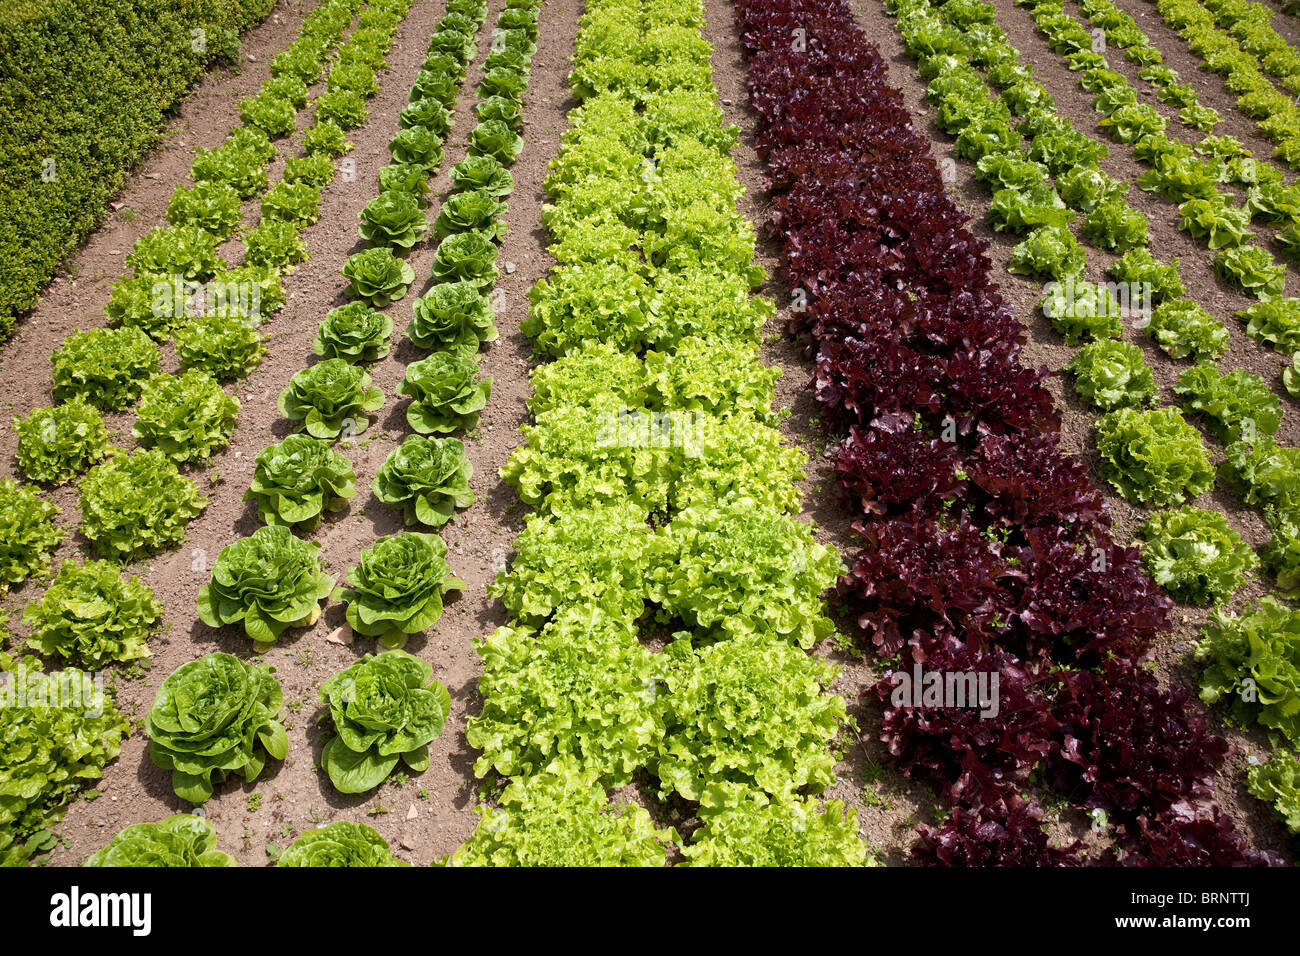 Very tidy cabbage lettuce garden bed rows Stock Photo